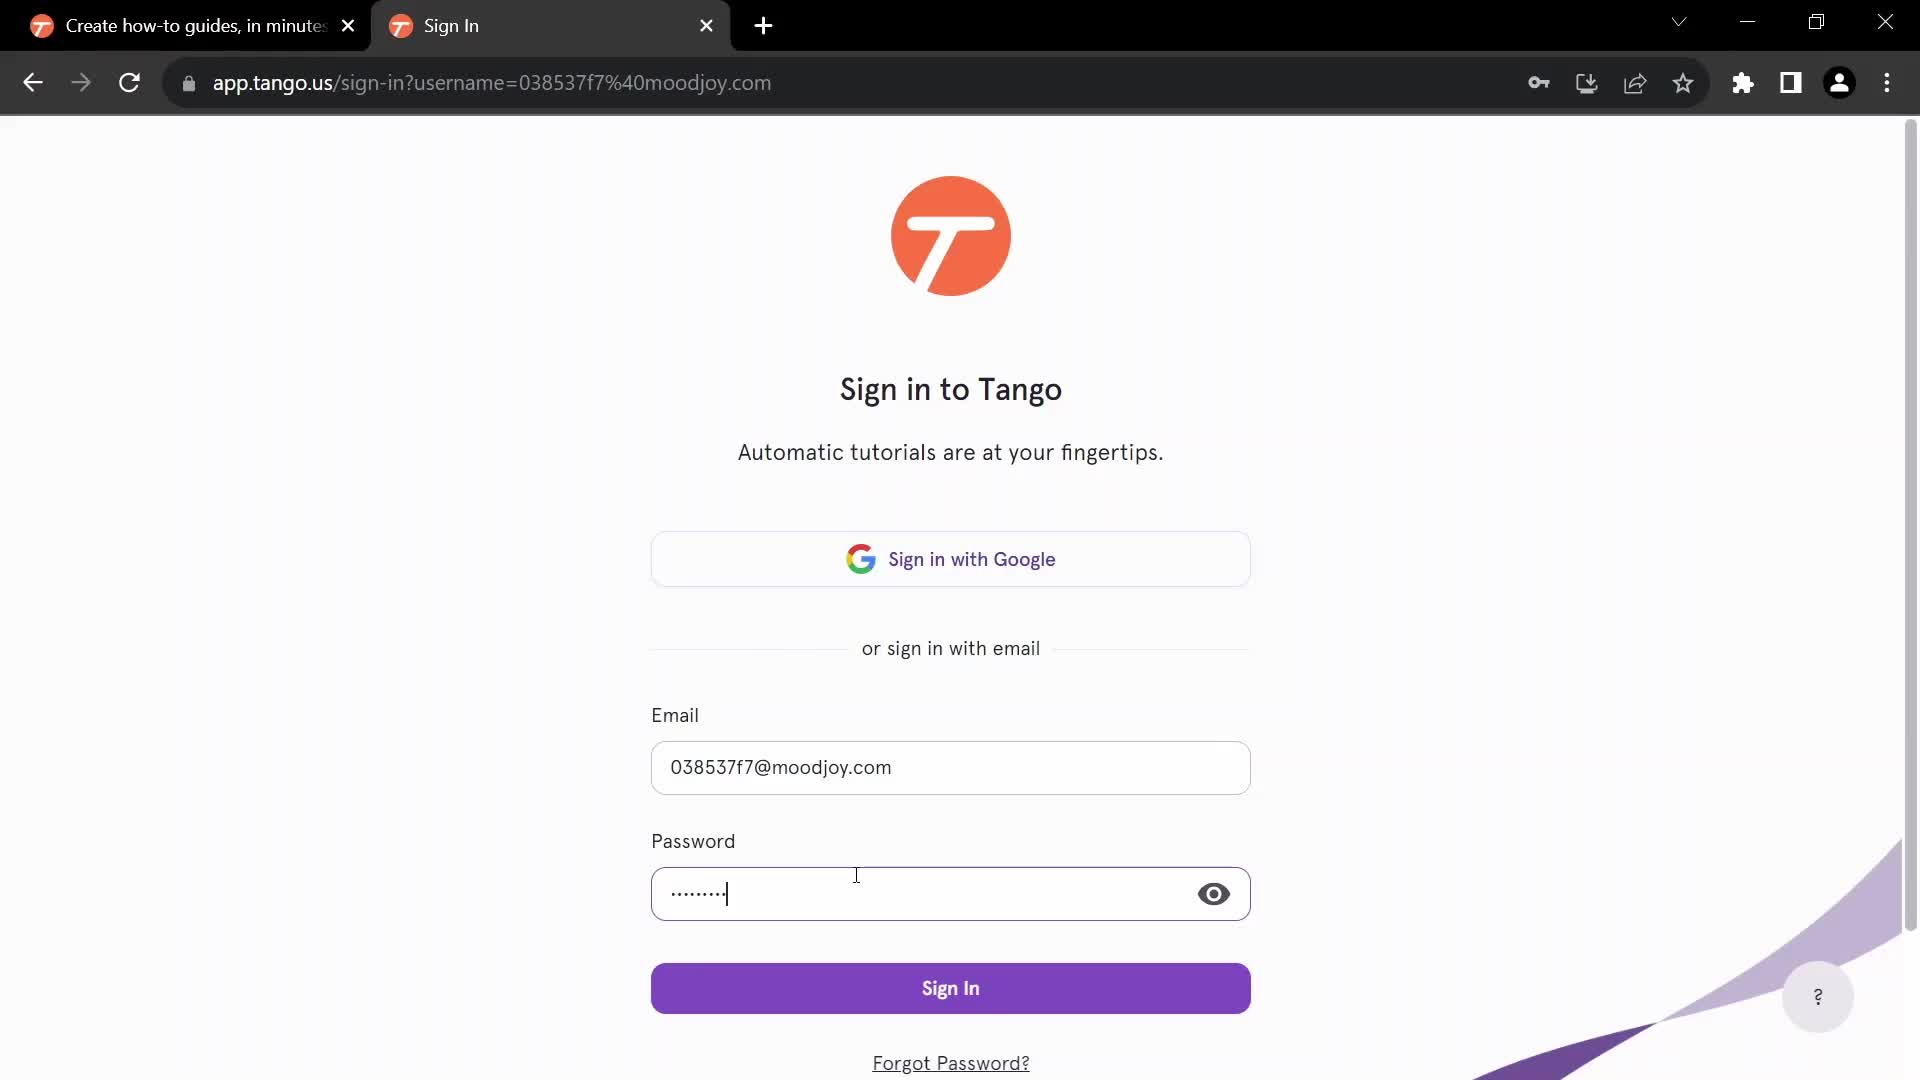 Screenshot of Sign in on Onboarding on Tango user flow